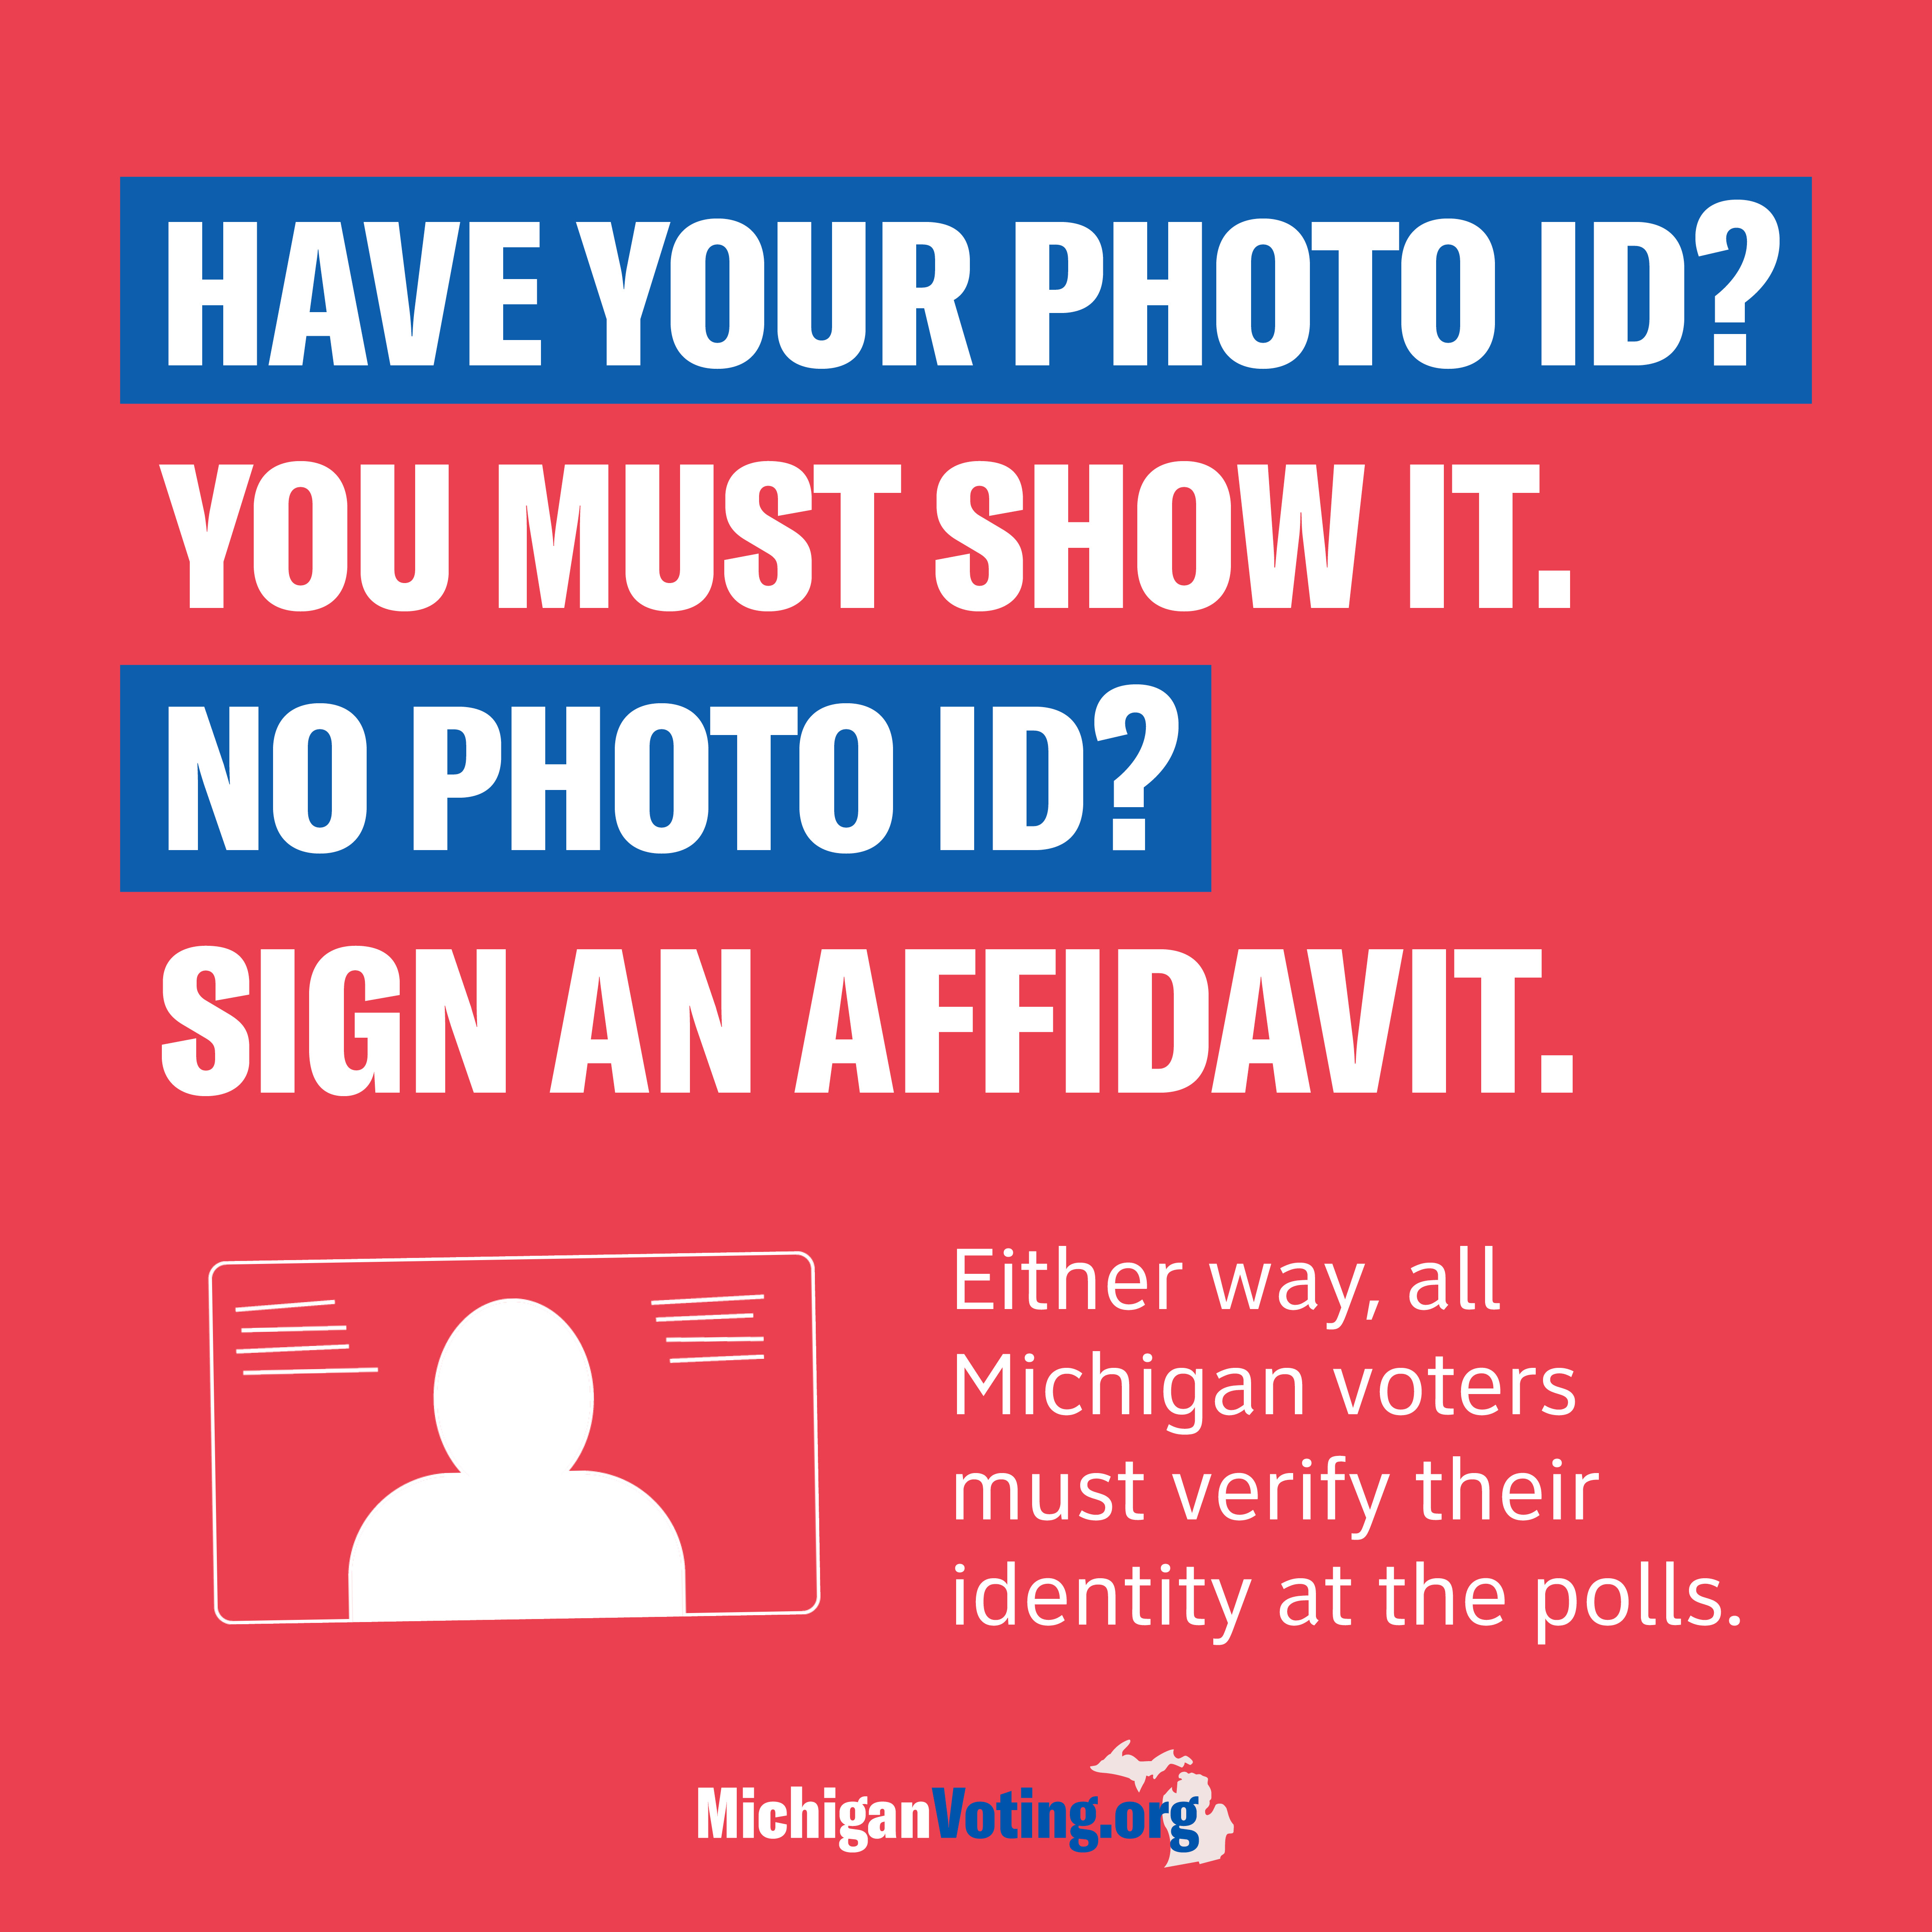 Have your photo ID?